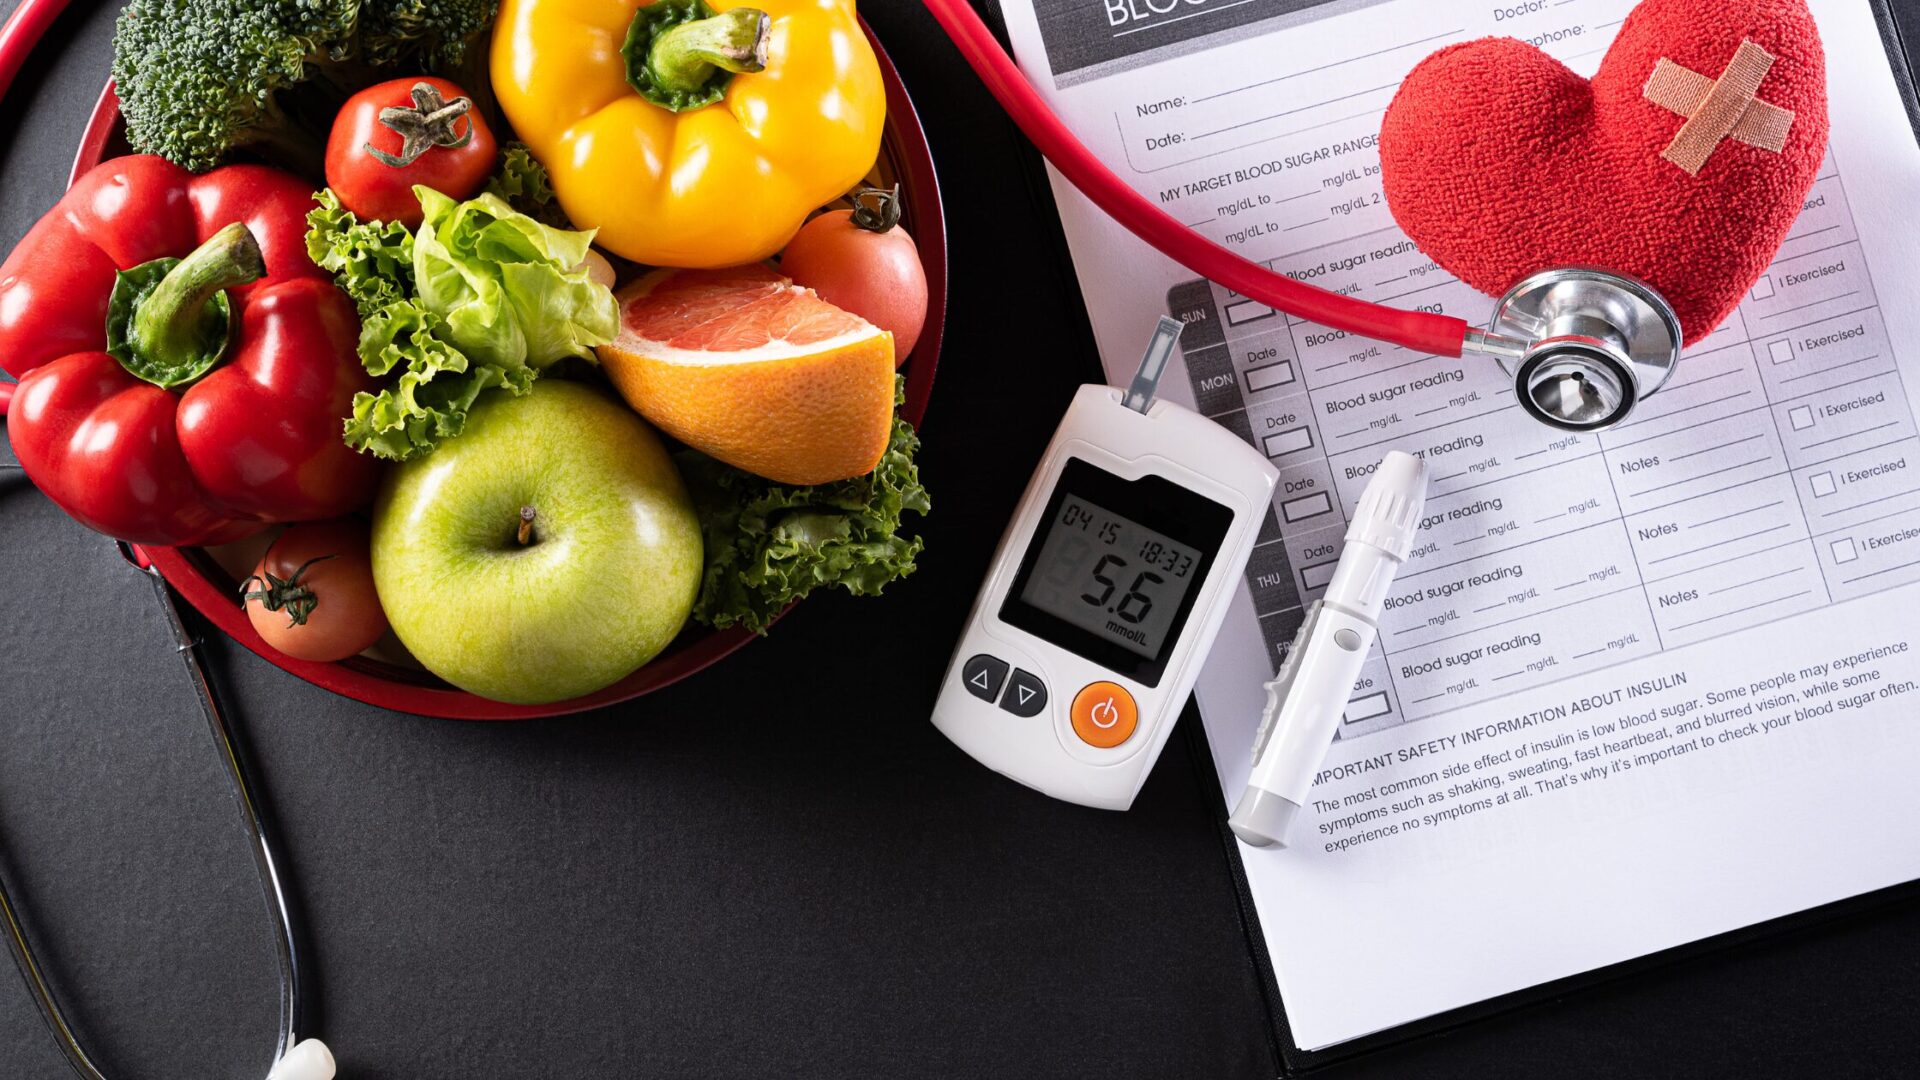 Glucose monitor on a table with food and medical notes.